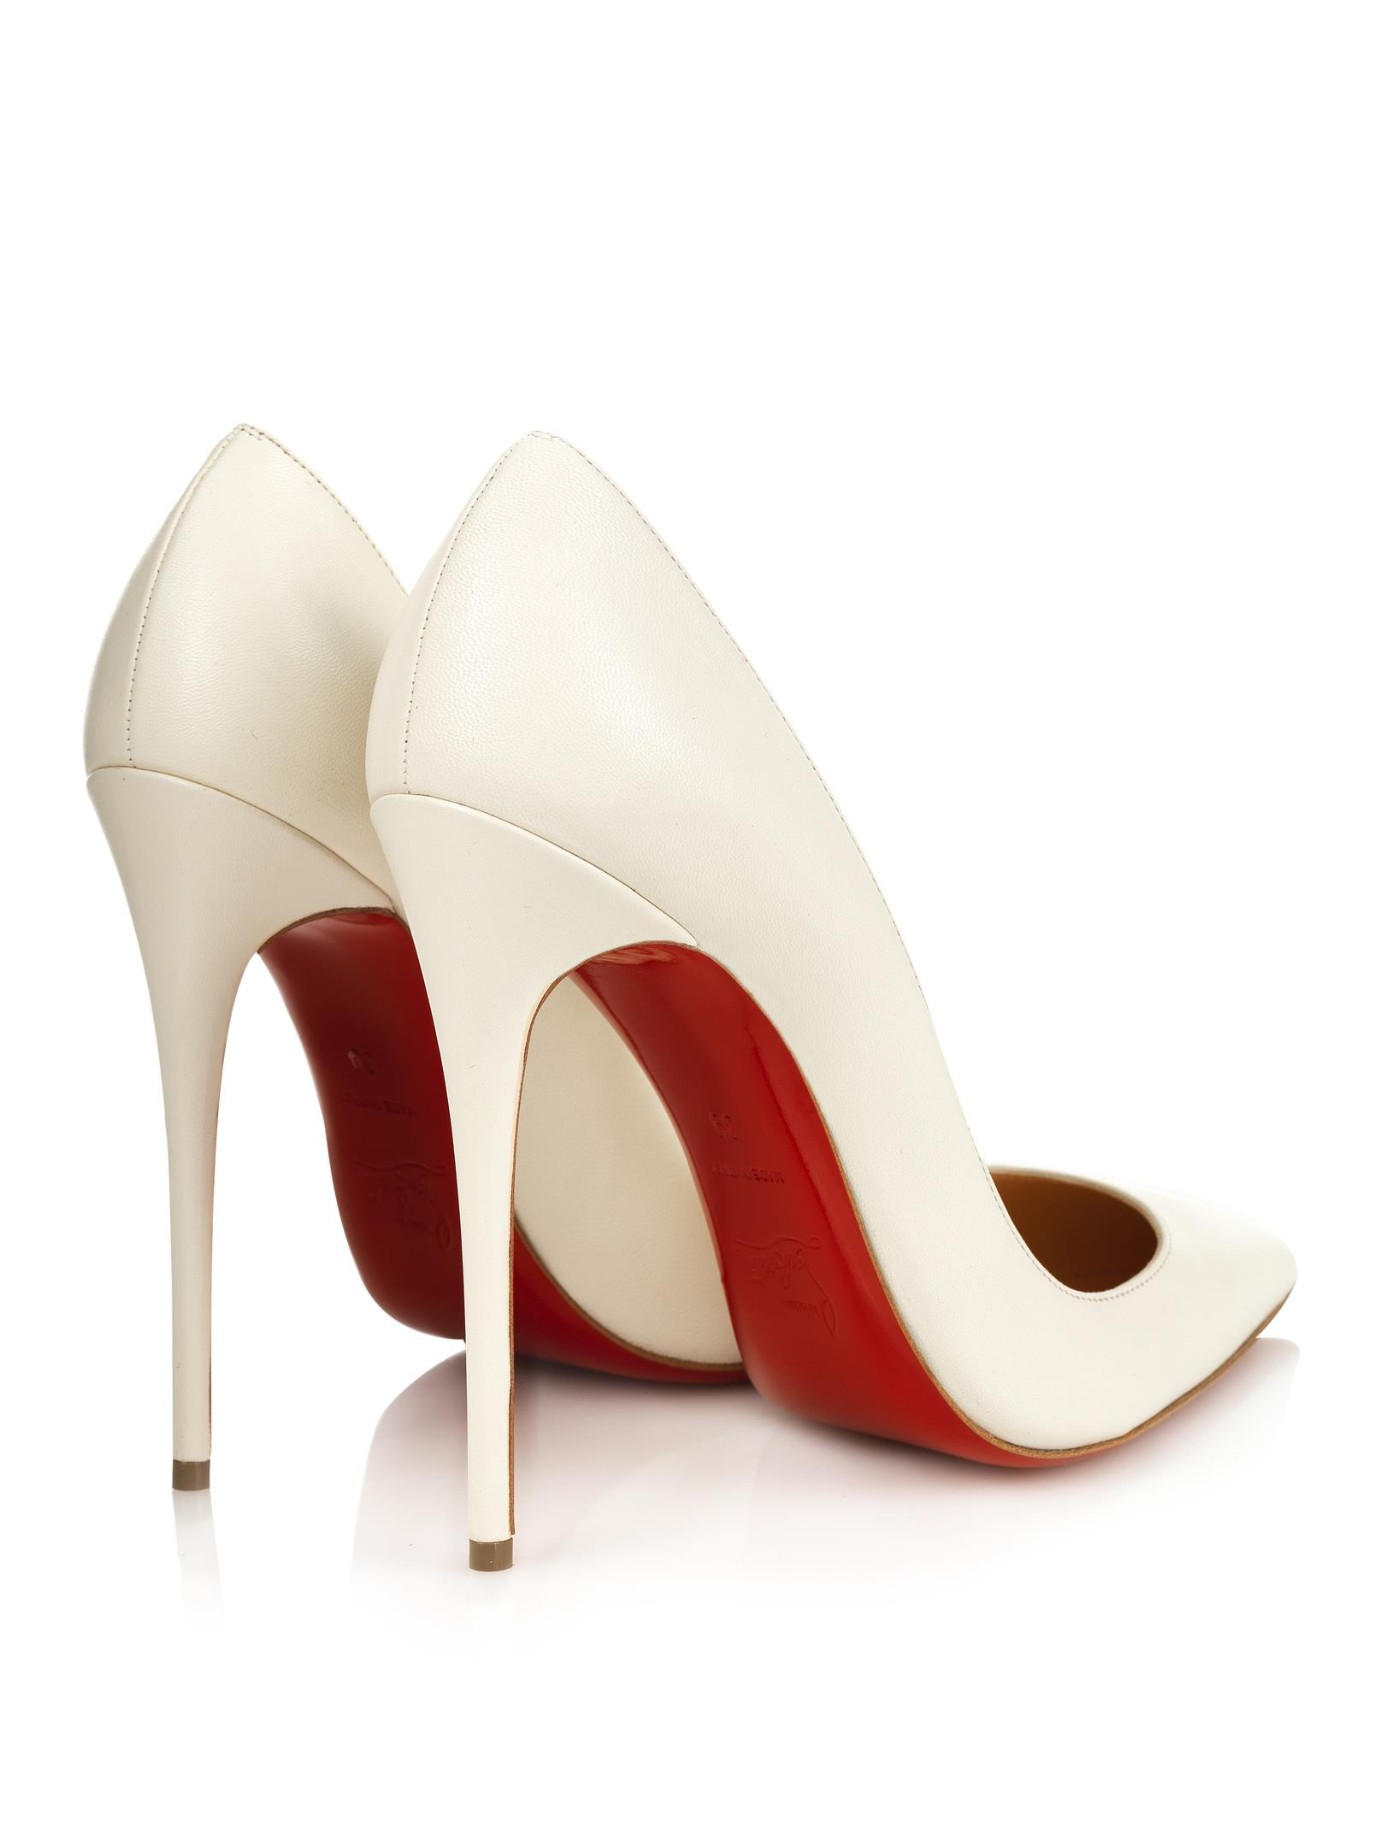 Lyst - Christian Louboutin So Kate 120Mm Pumps in White